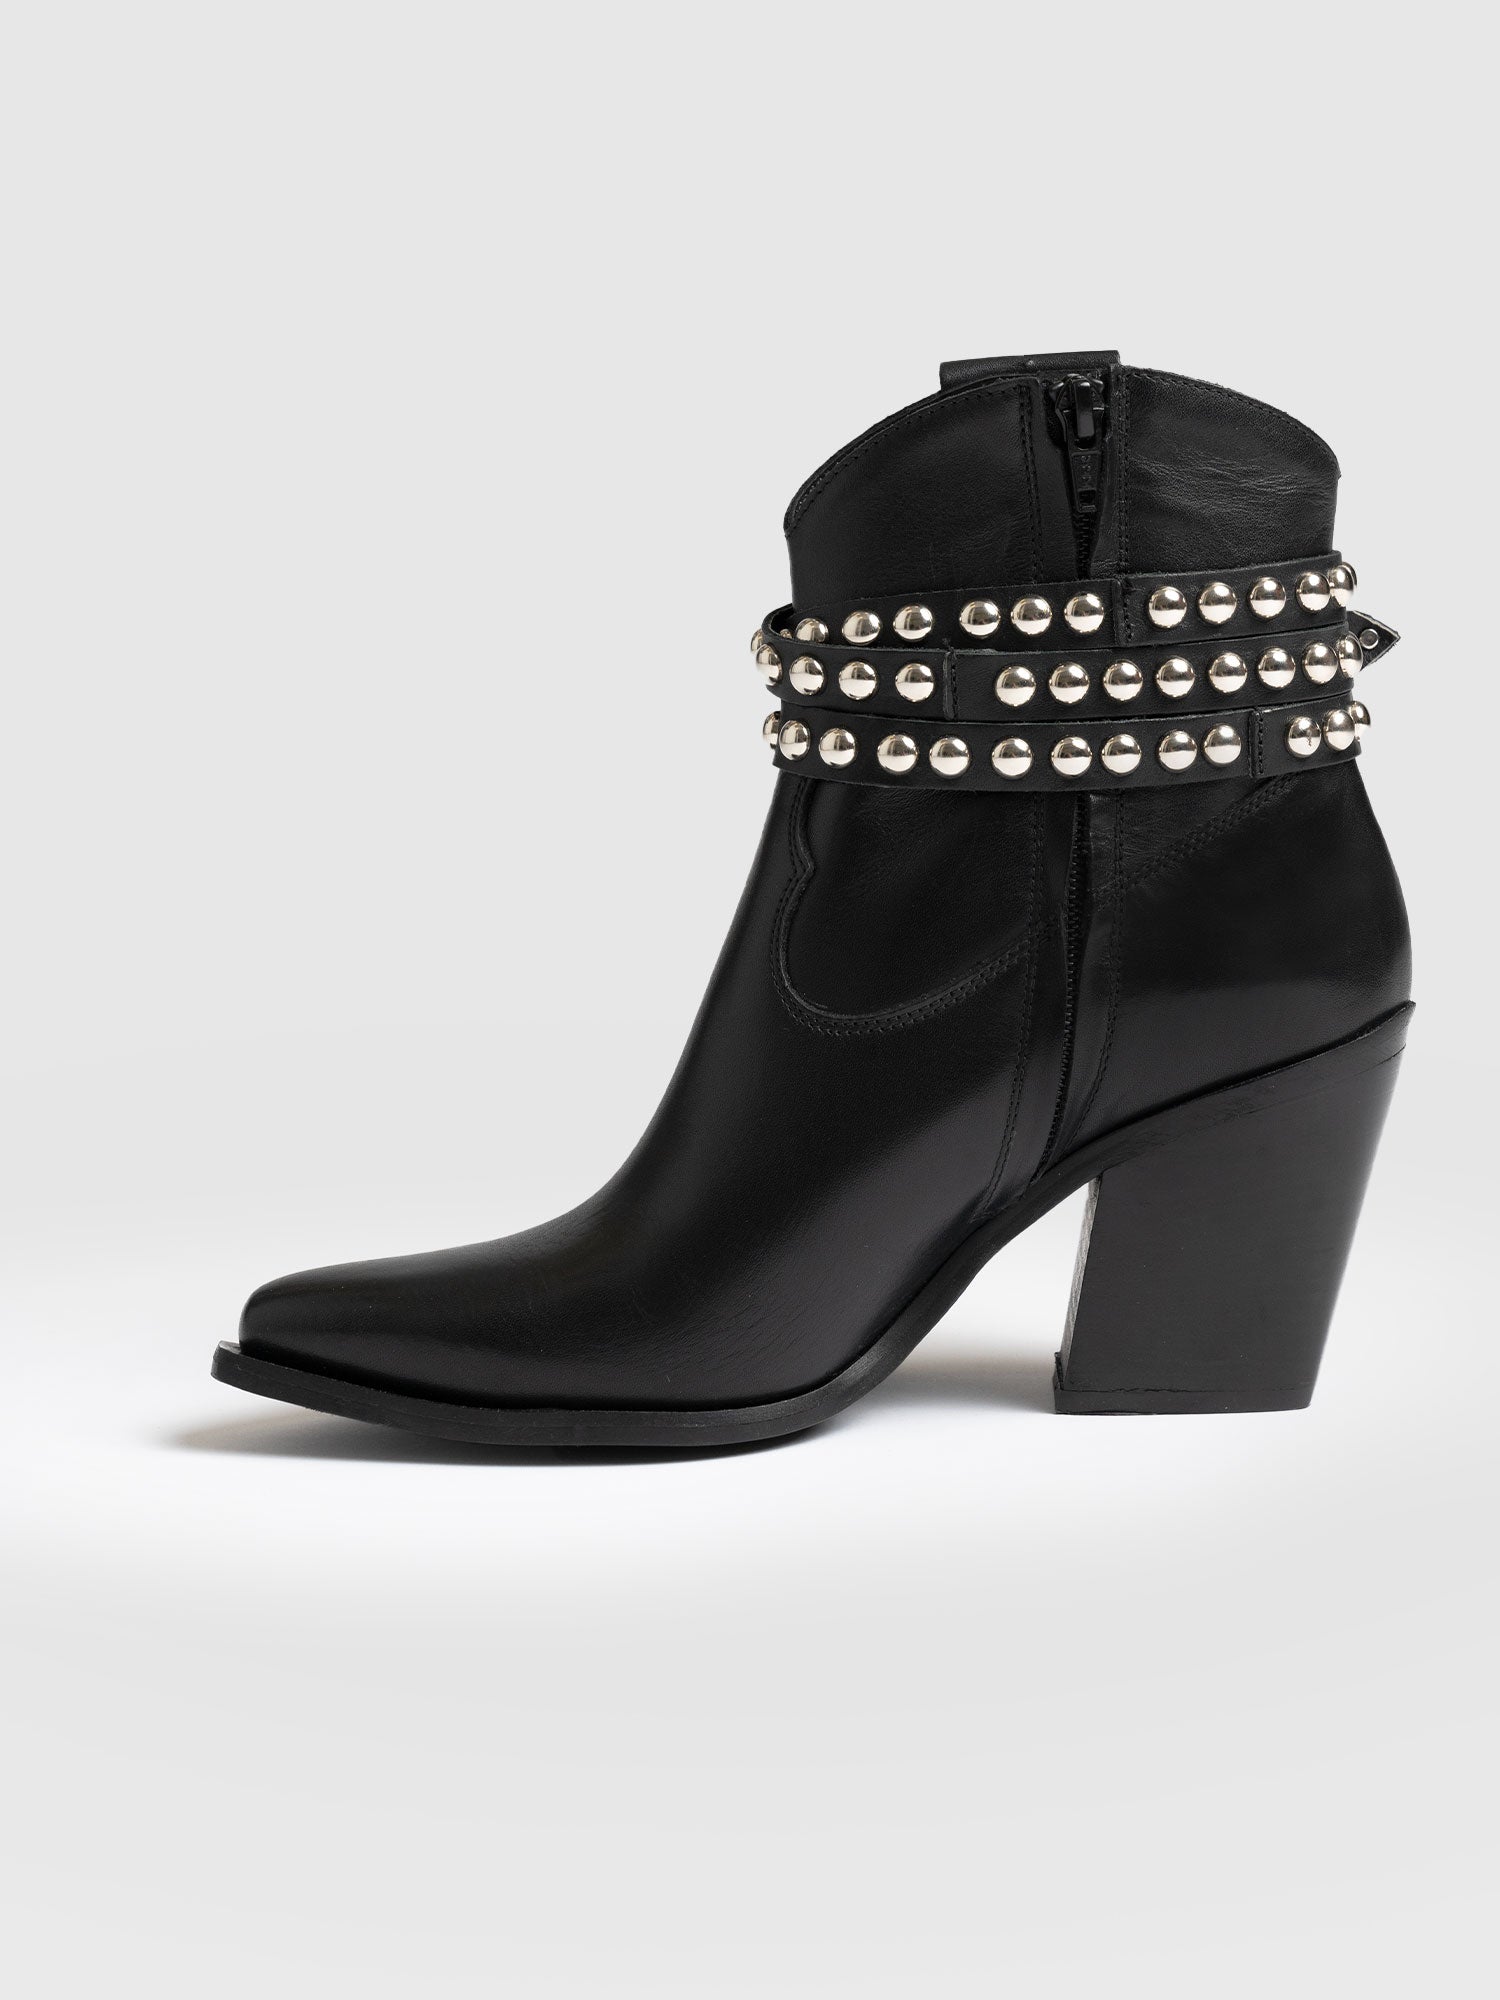 Western Studded Boot Black - Women's Leather Boots | Saint + Sofia